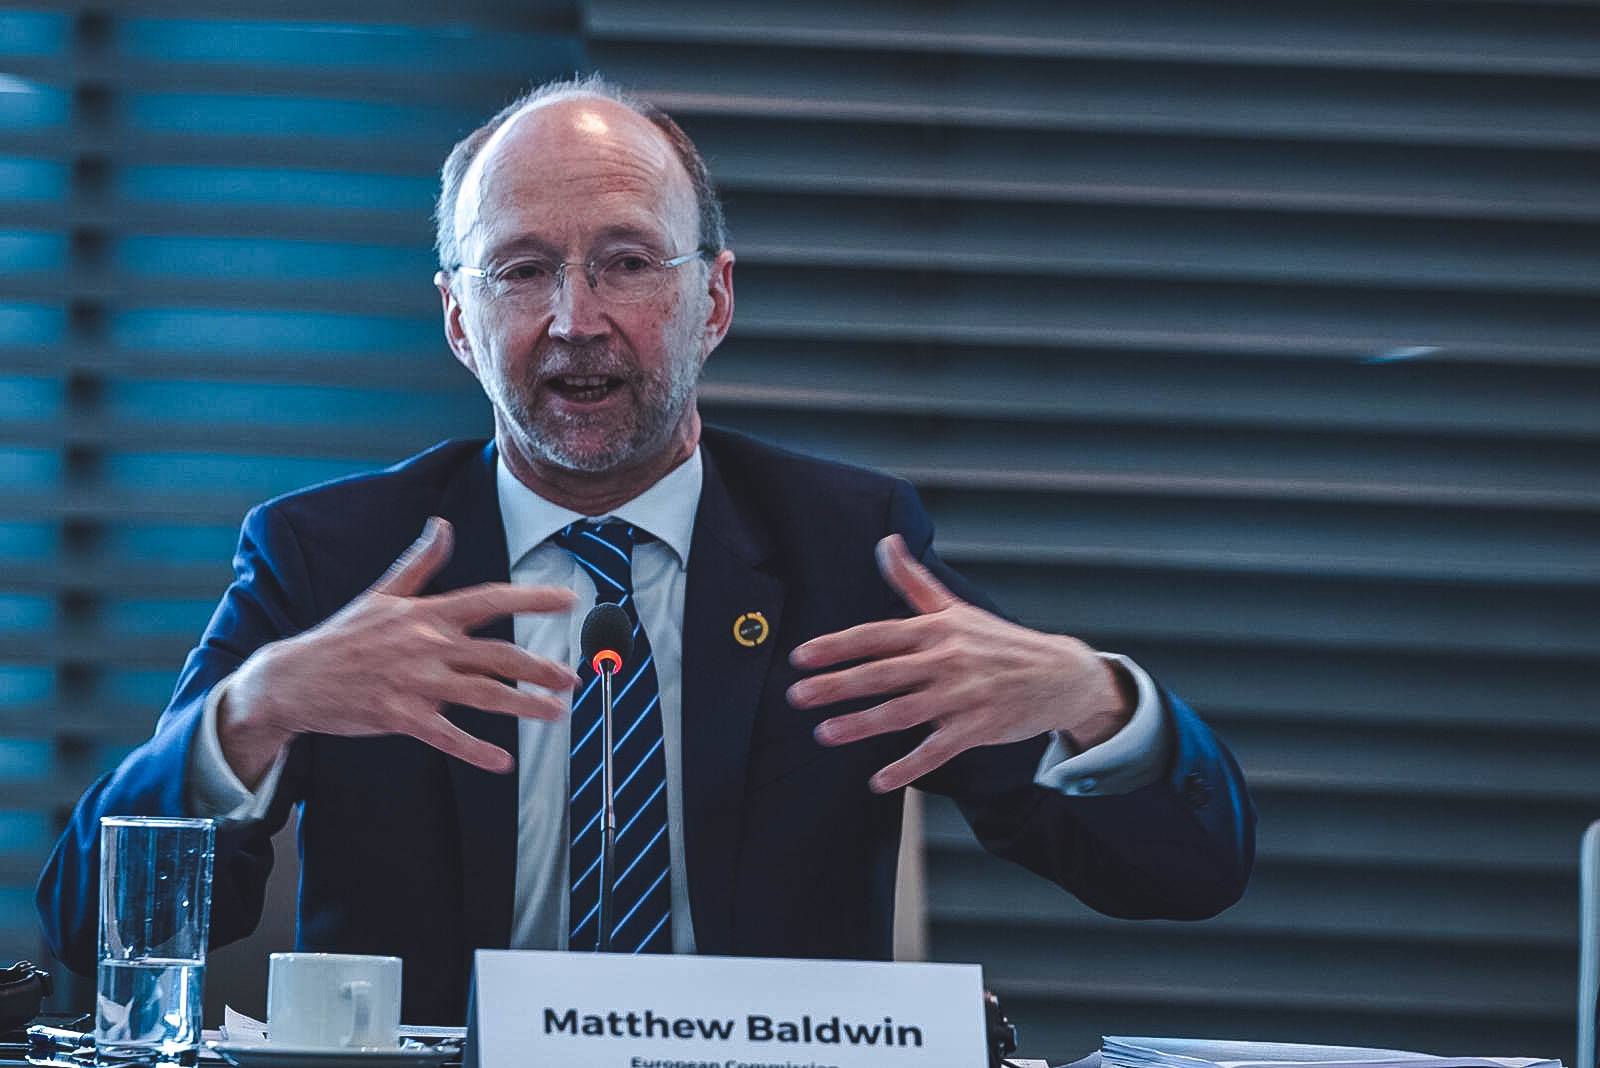 The European Union’s deputy director of the department of energy, Matthew Baldwin, described Nigeria as a “reliable partner” to replace Russian gas supplies.